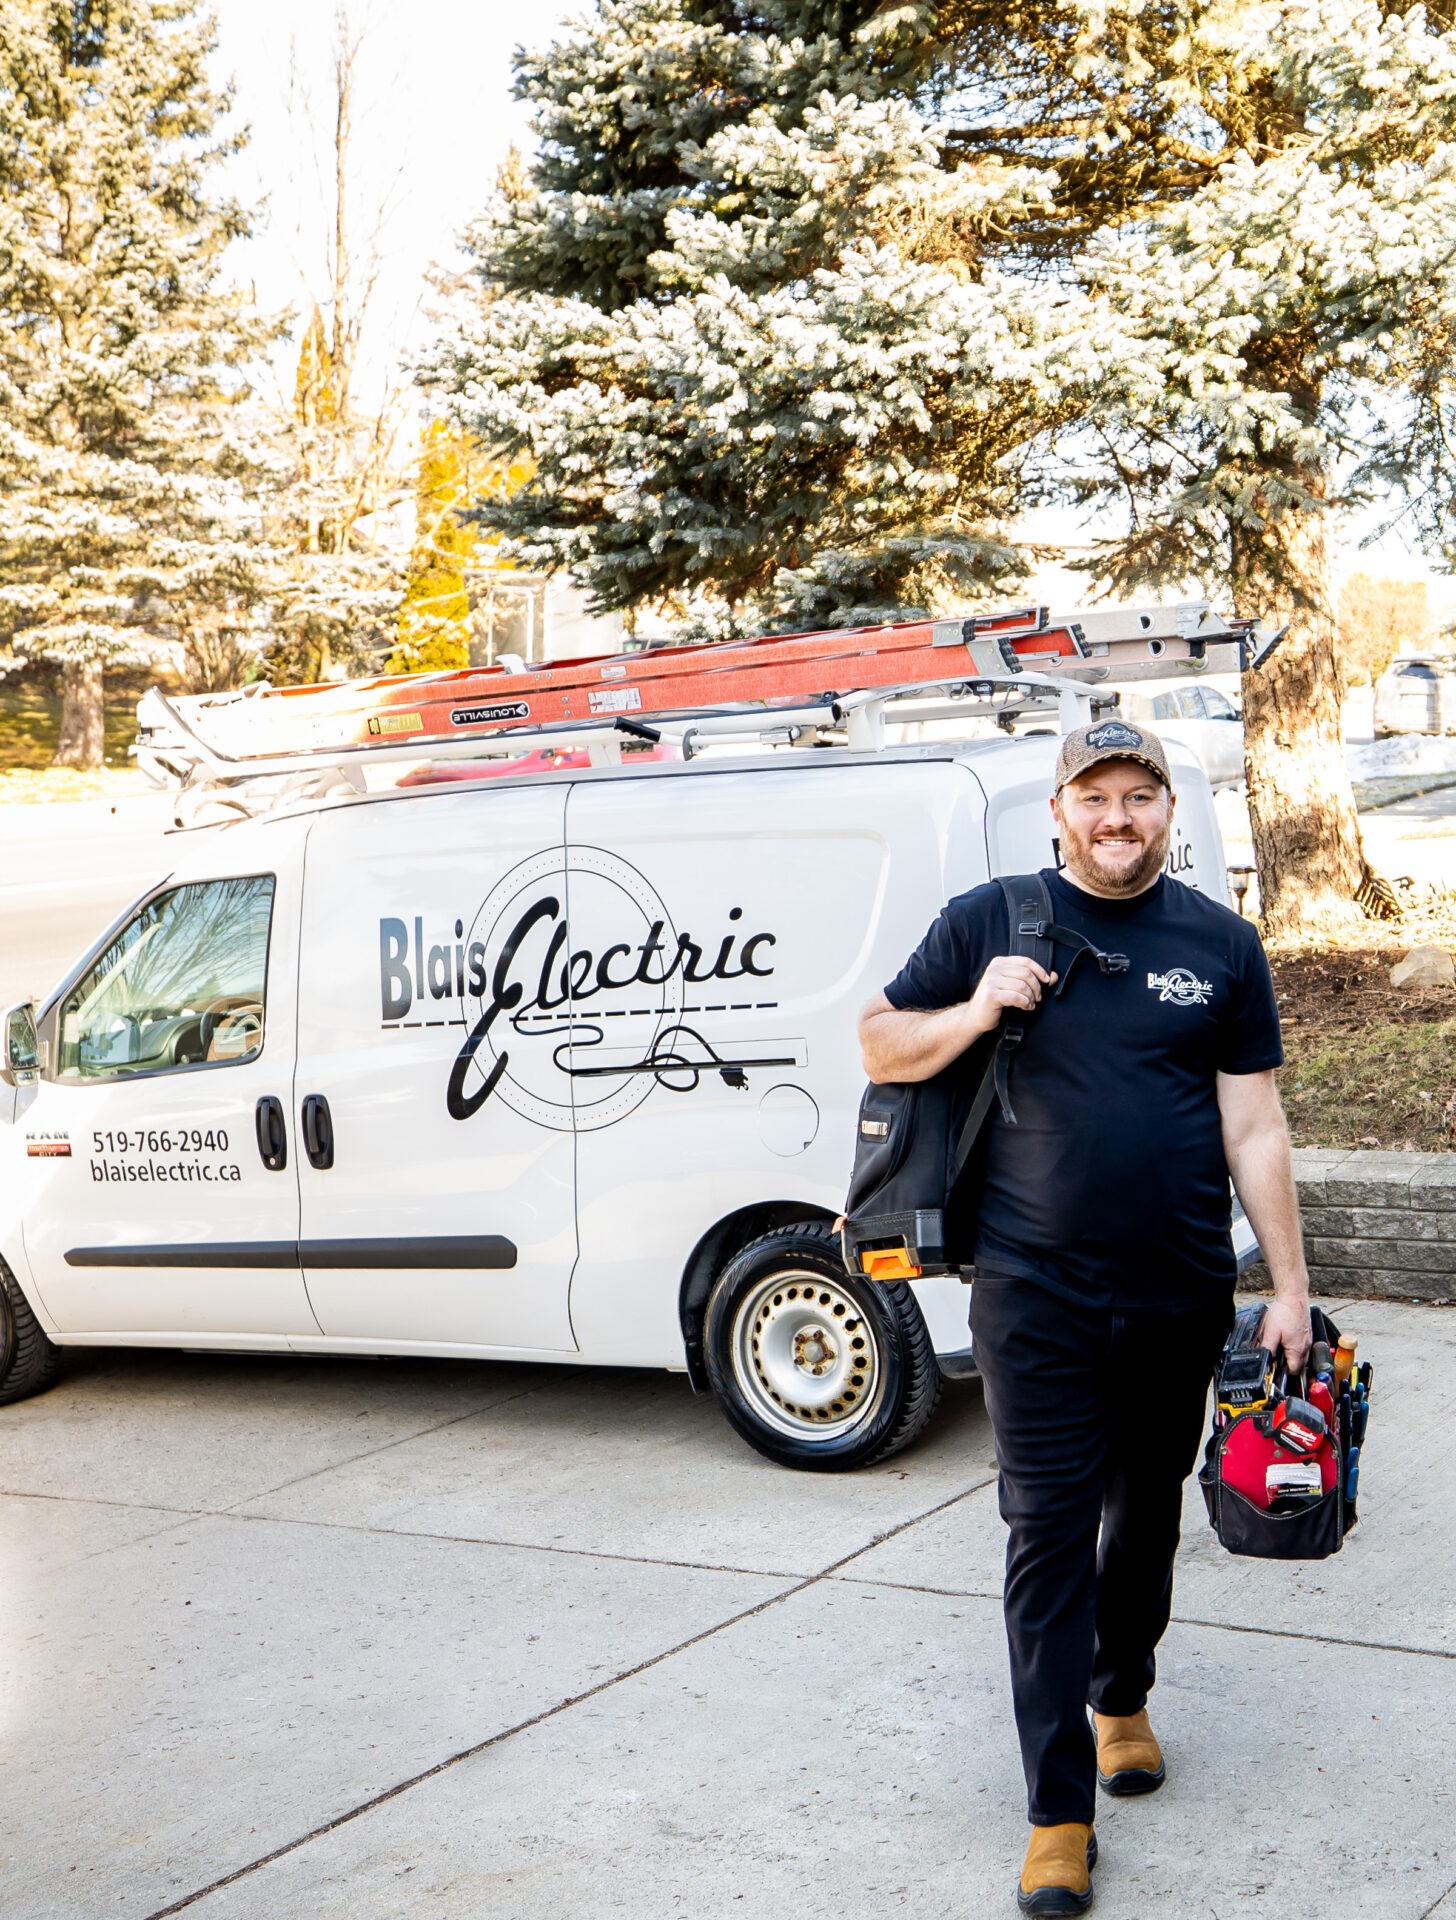 A smiling person stands in front of a white van labeled "Blais Electric," holding a tool bag, with a ladder on the van, and trees in the background.